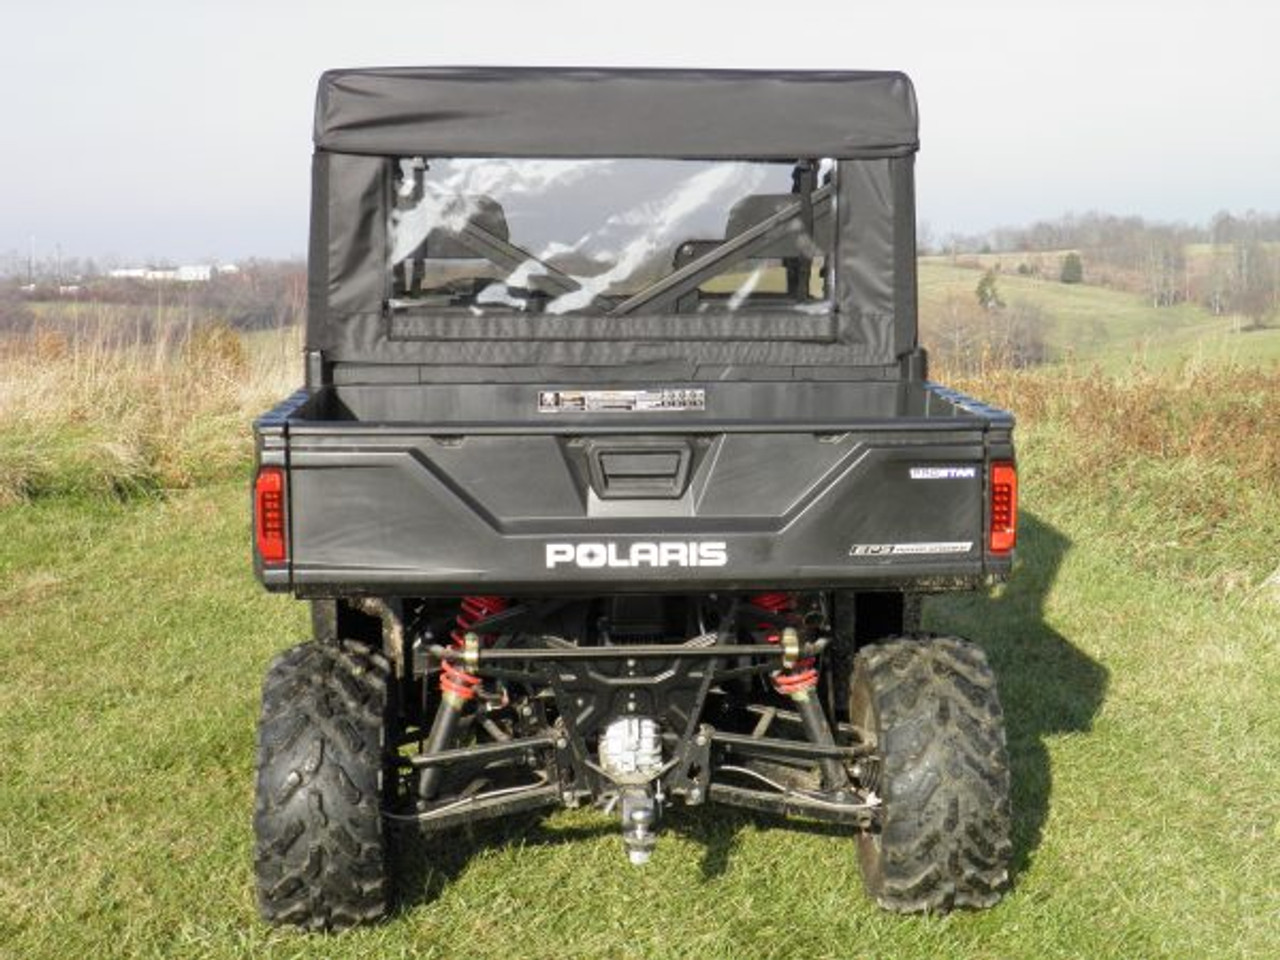 3 Star side x side Polaris Ranger Crew 1000/XP1000 full cab enclosure with vinyl windshield rear view